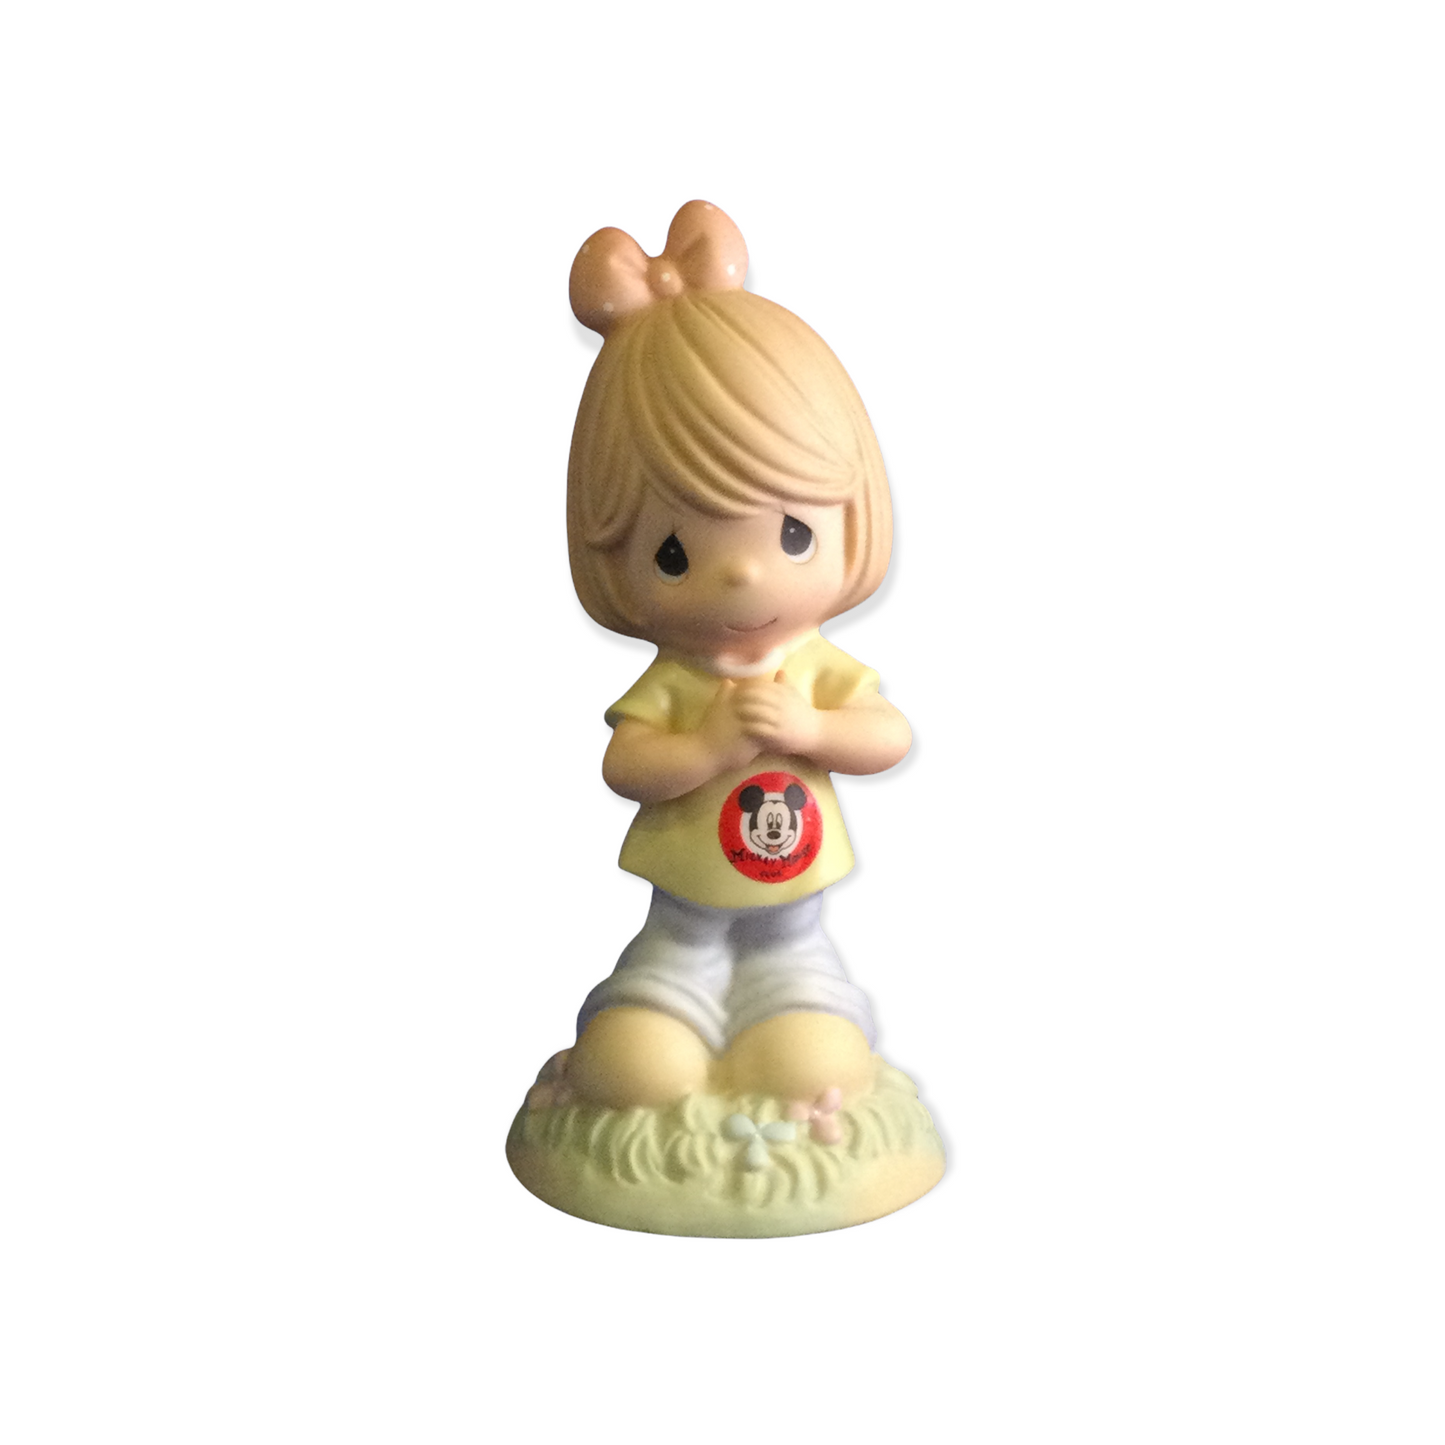 You're My Mouseketeer - Precious Moment Disney Figurine